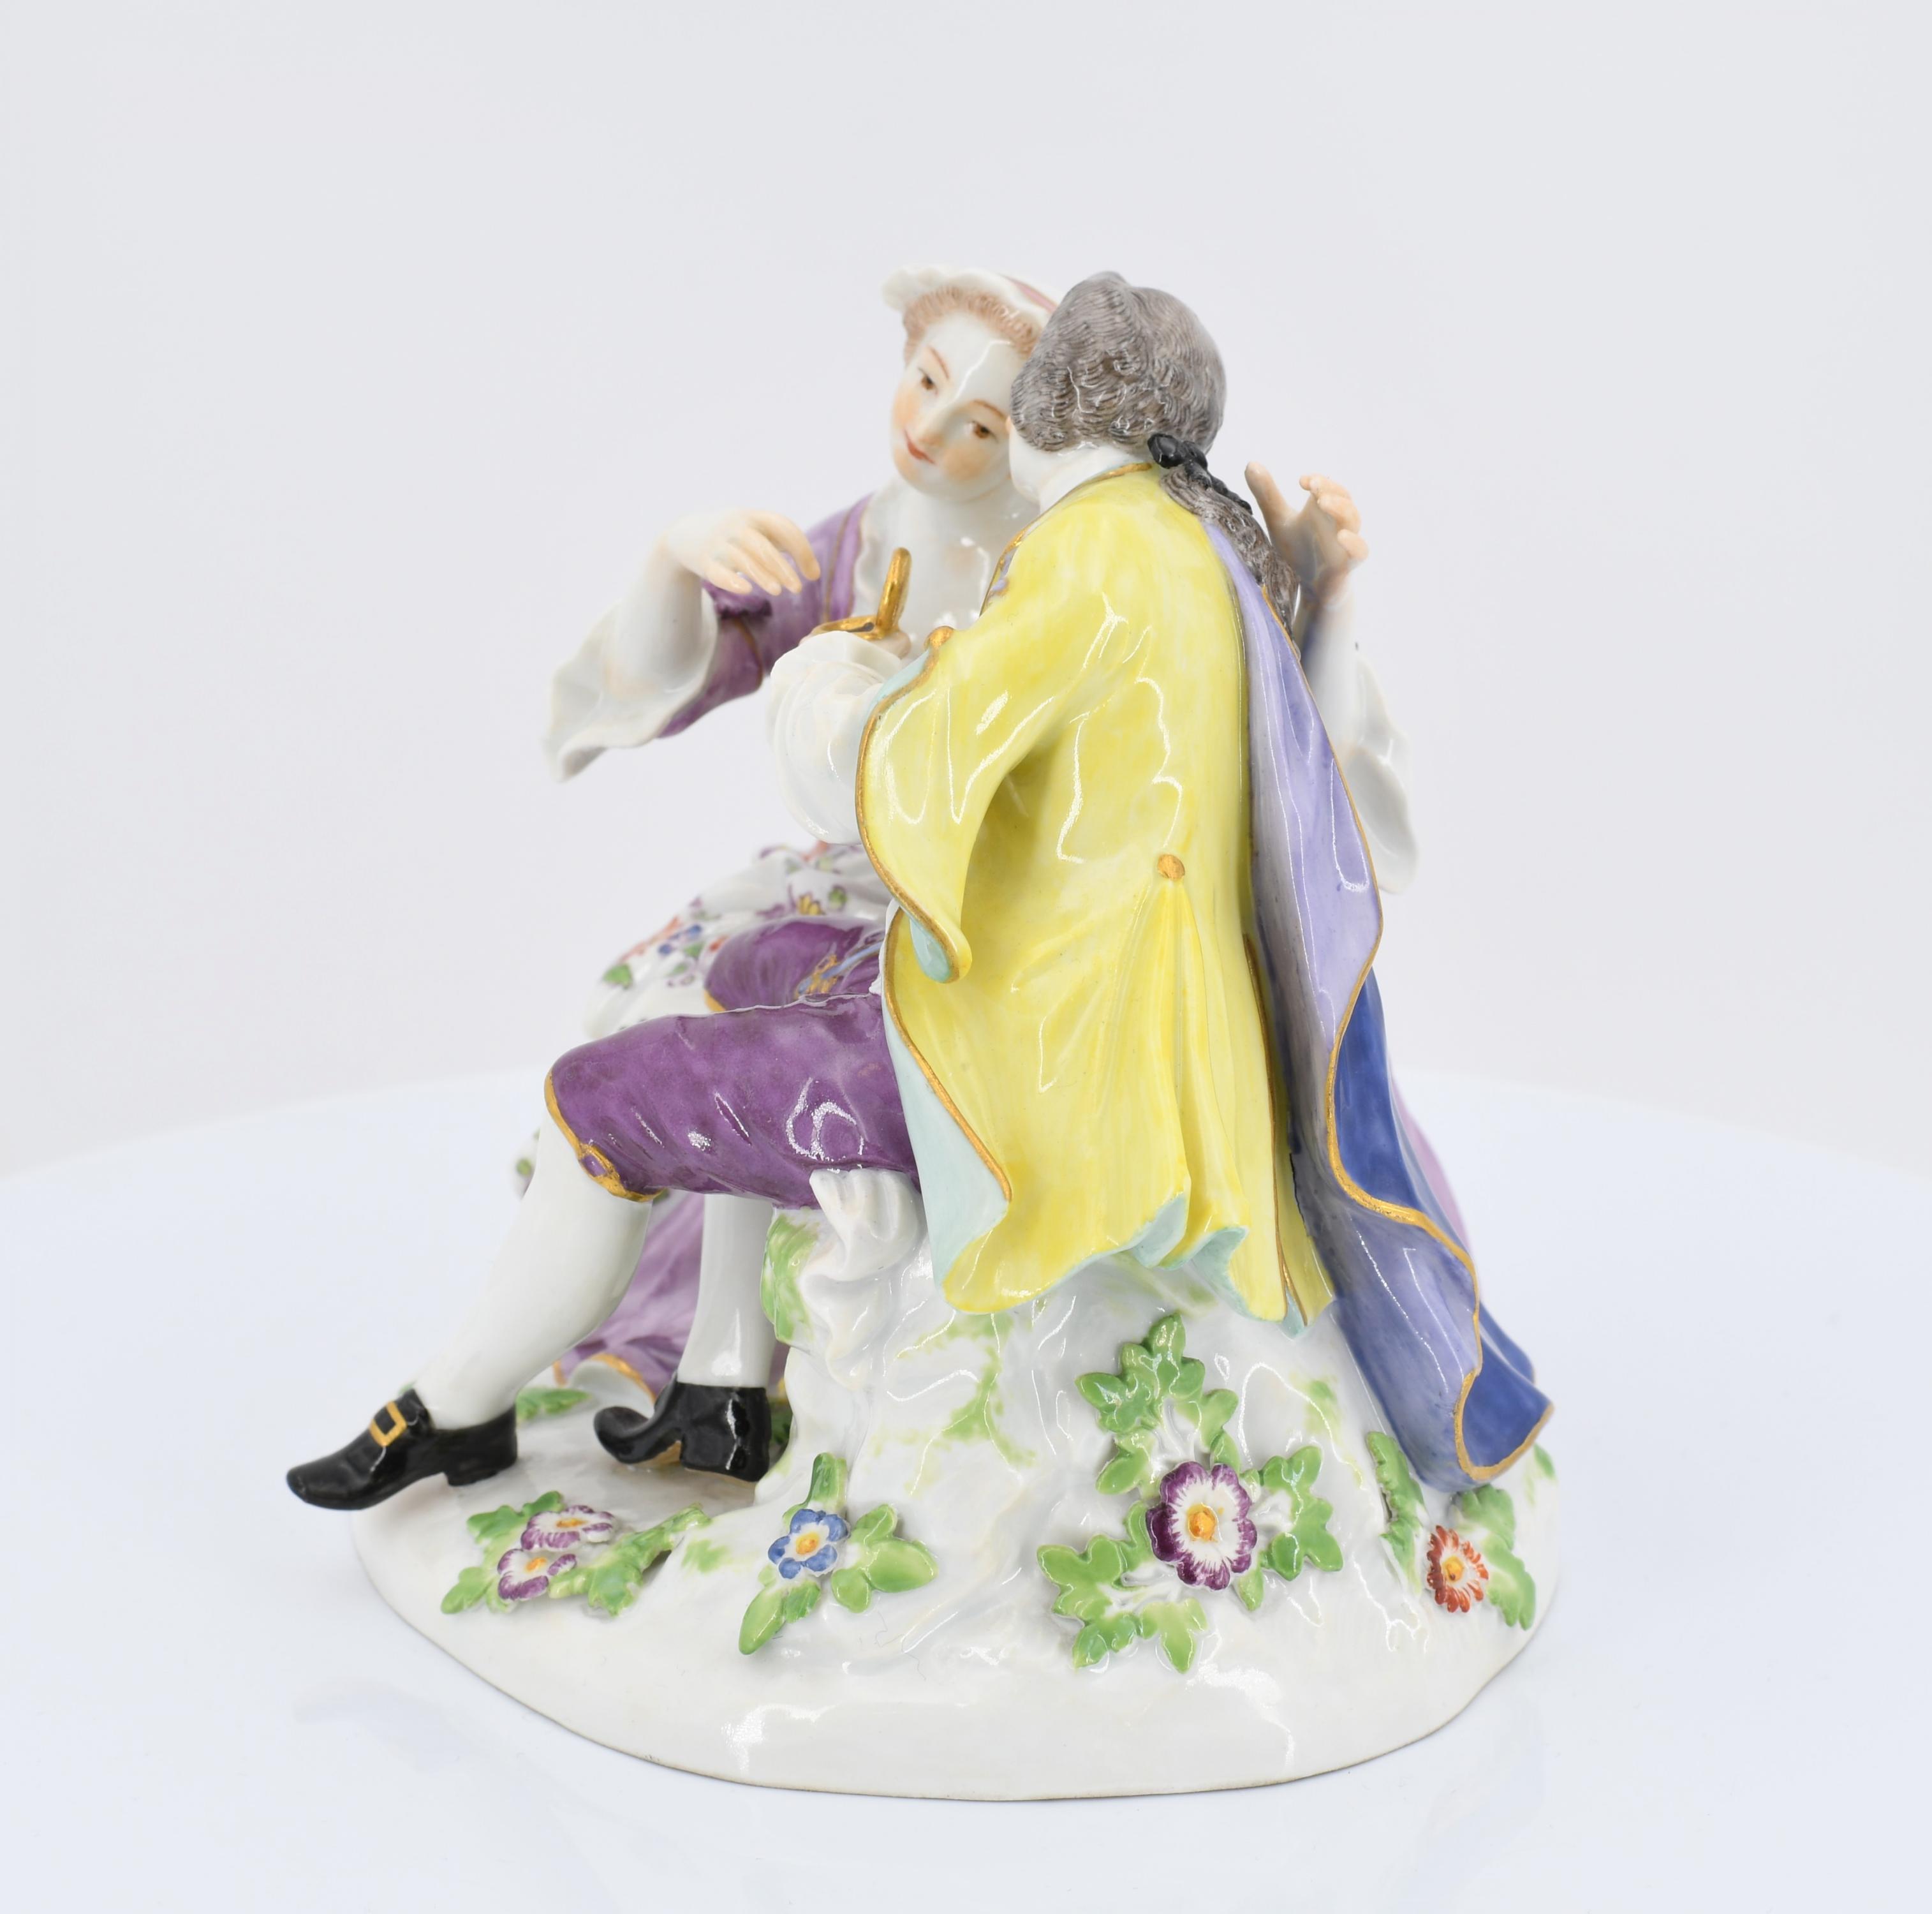 Lovers with snuff box - Image 3 of 6